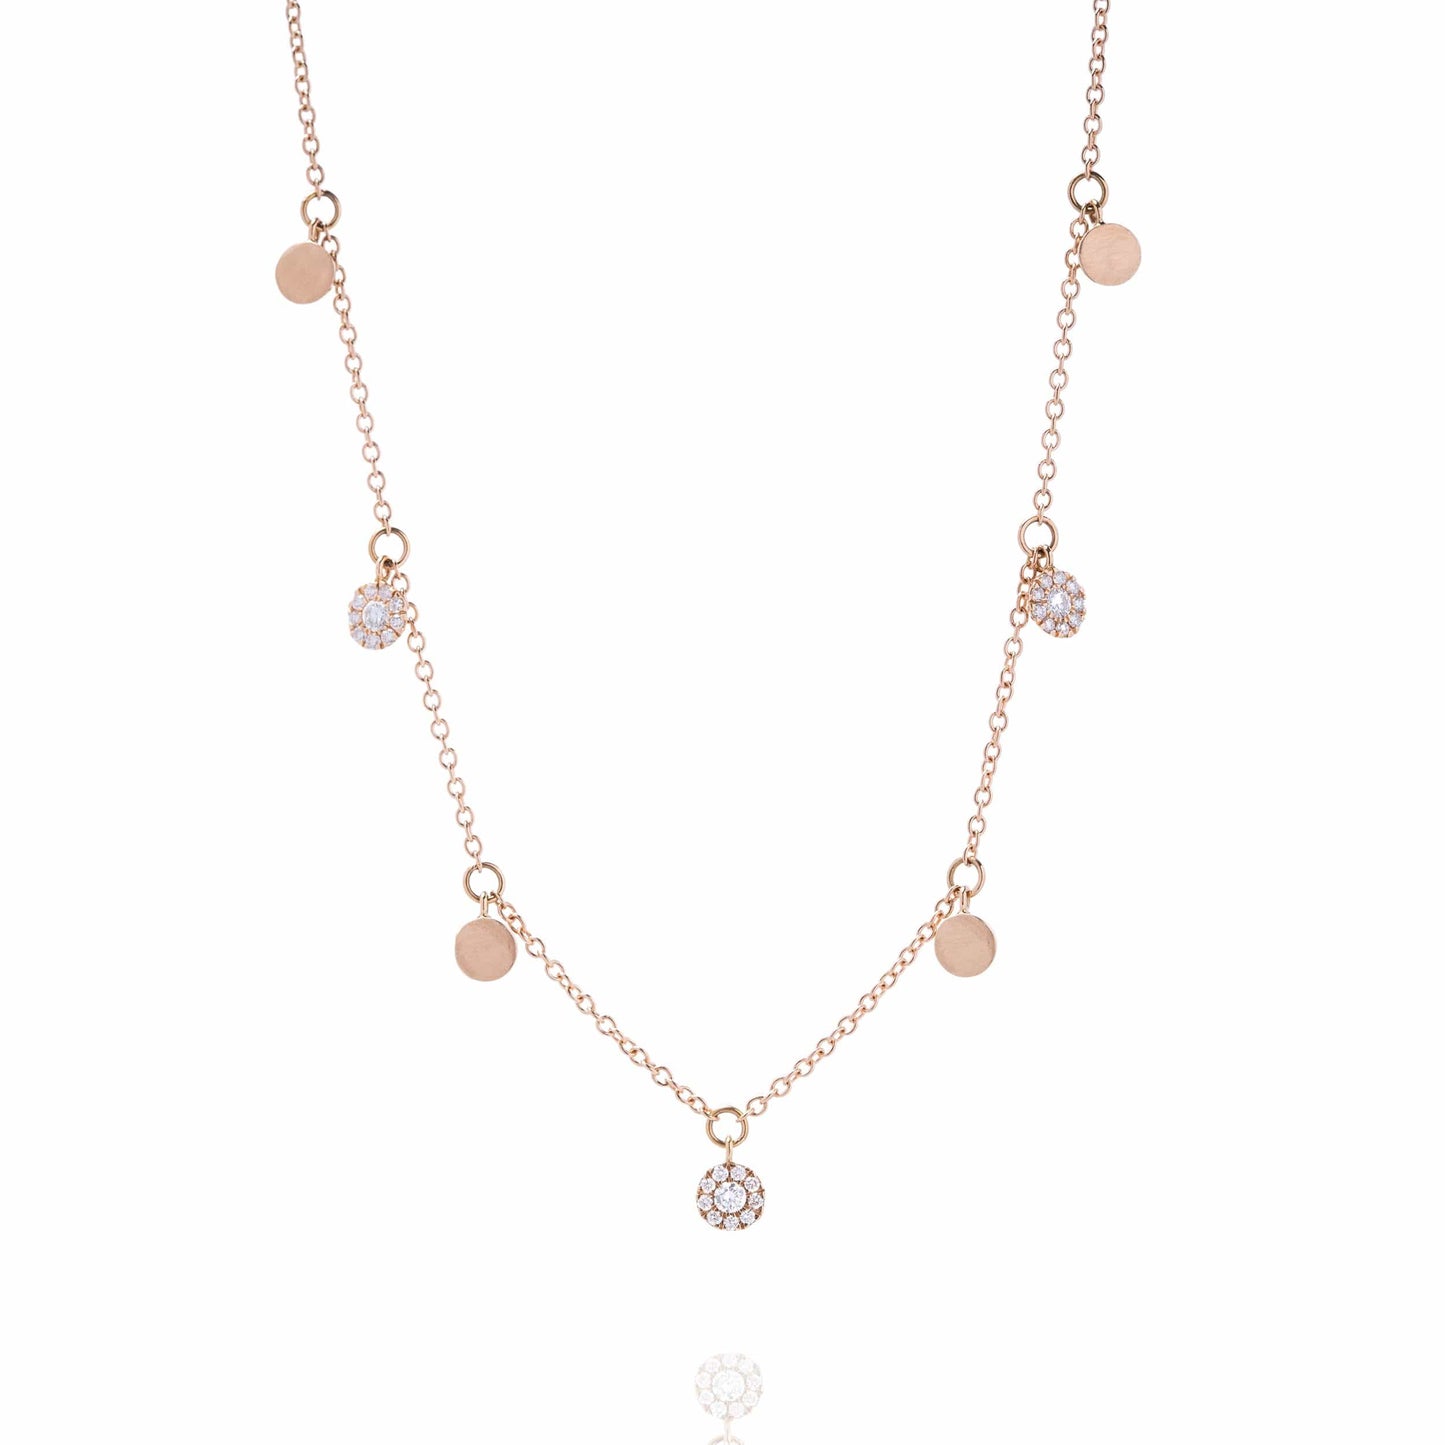 Dalia T Online Necklace Delicate Collection 18KT Rose Gold Alternate Diamond Circles Necklace